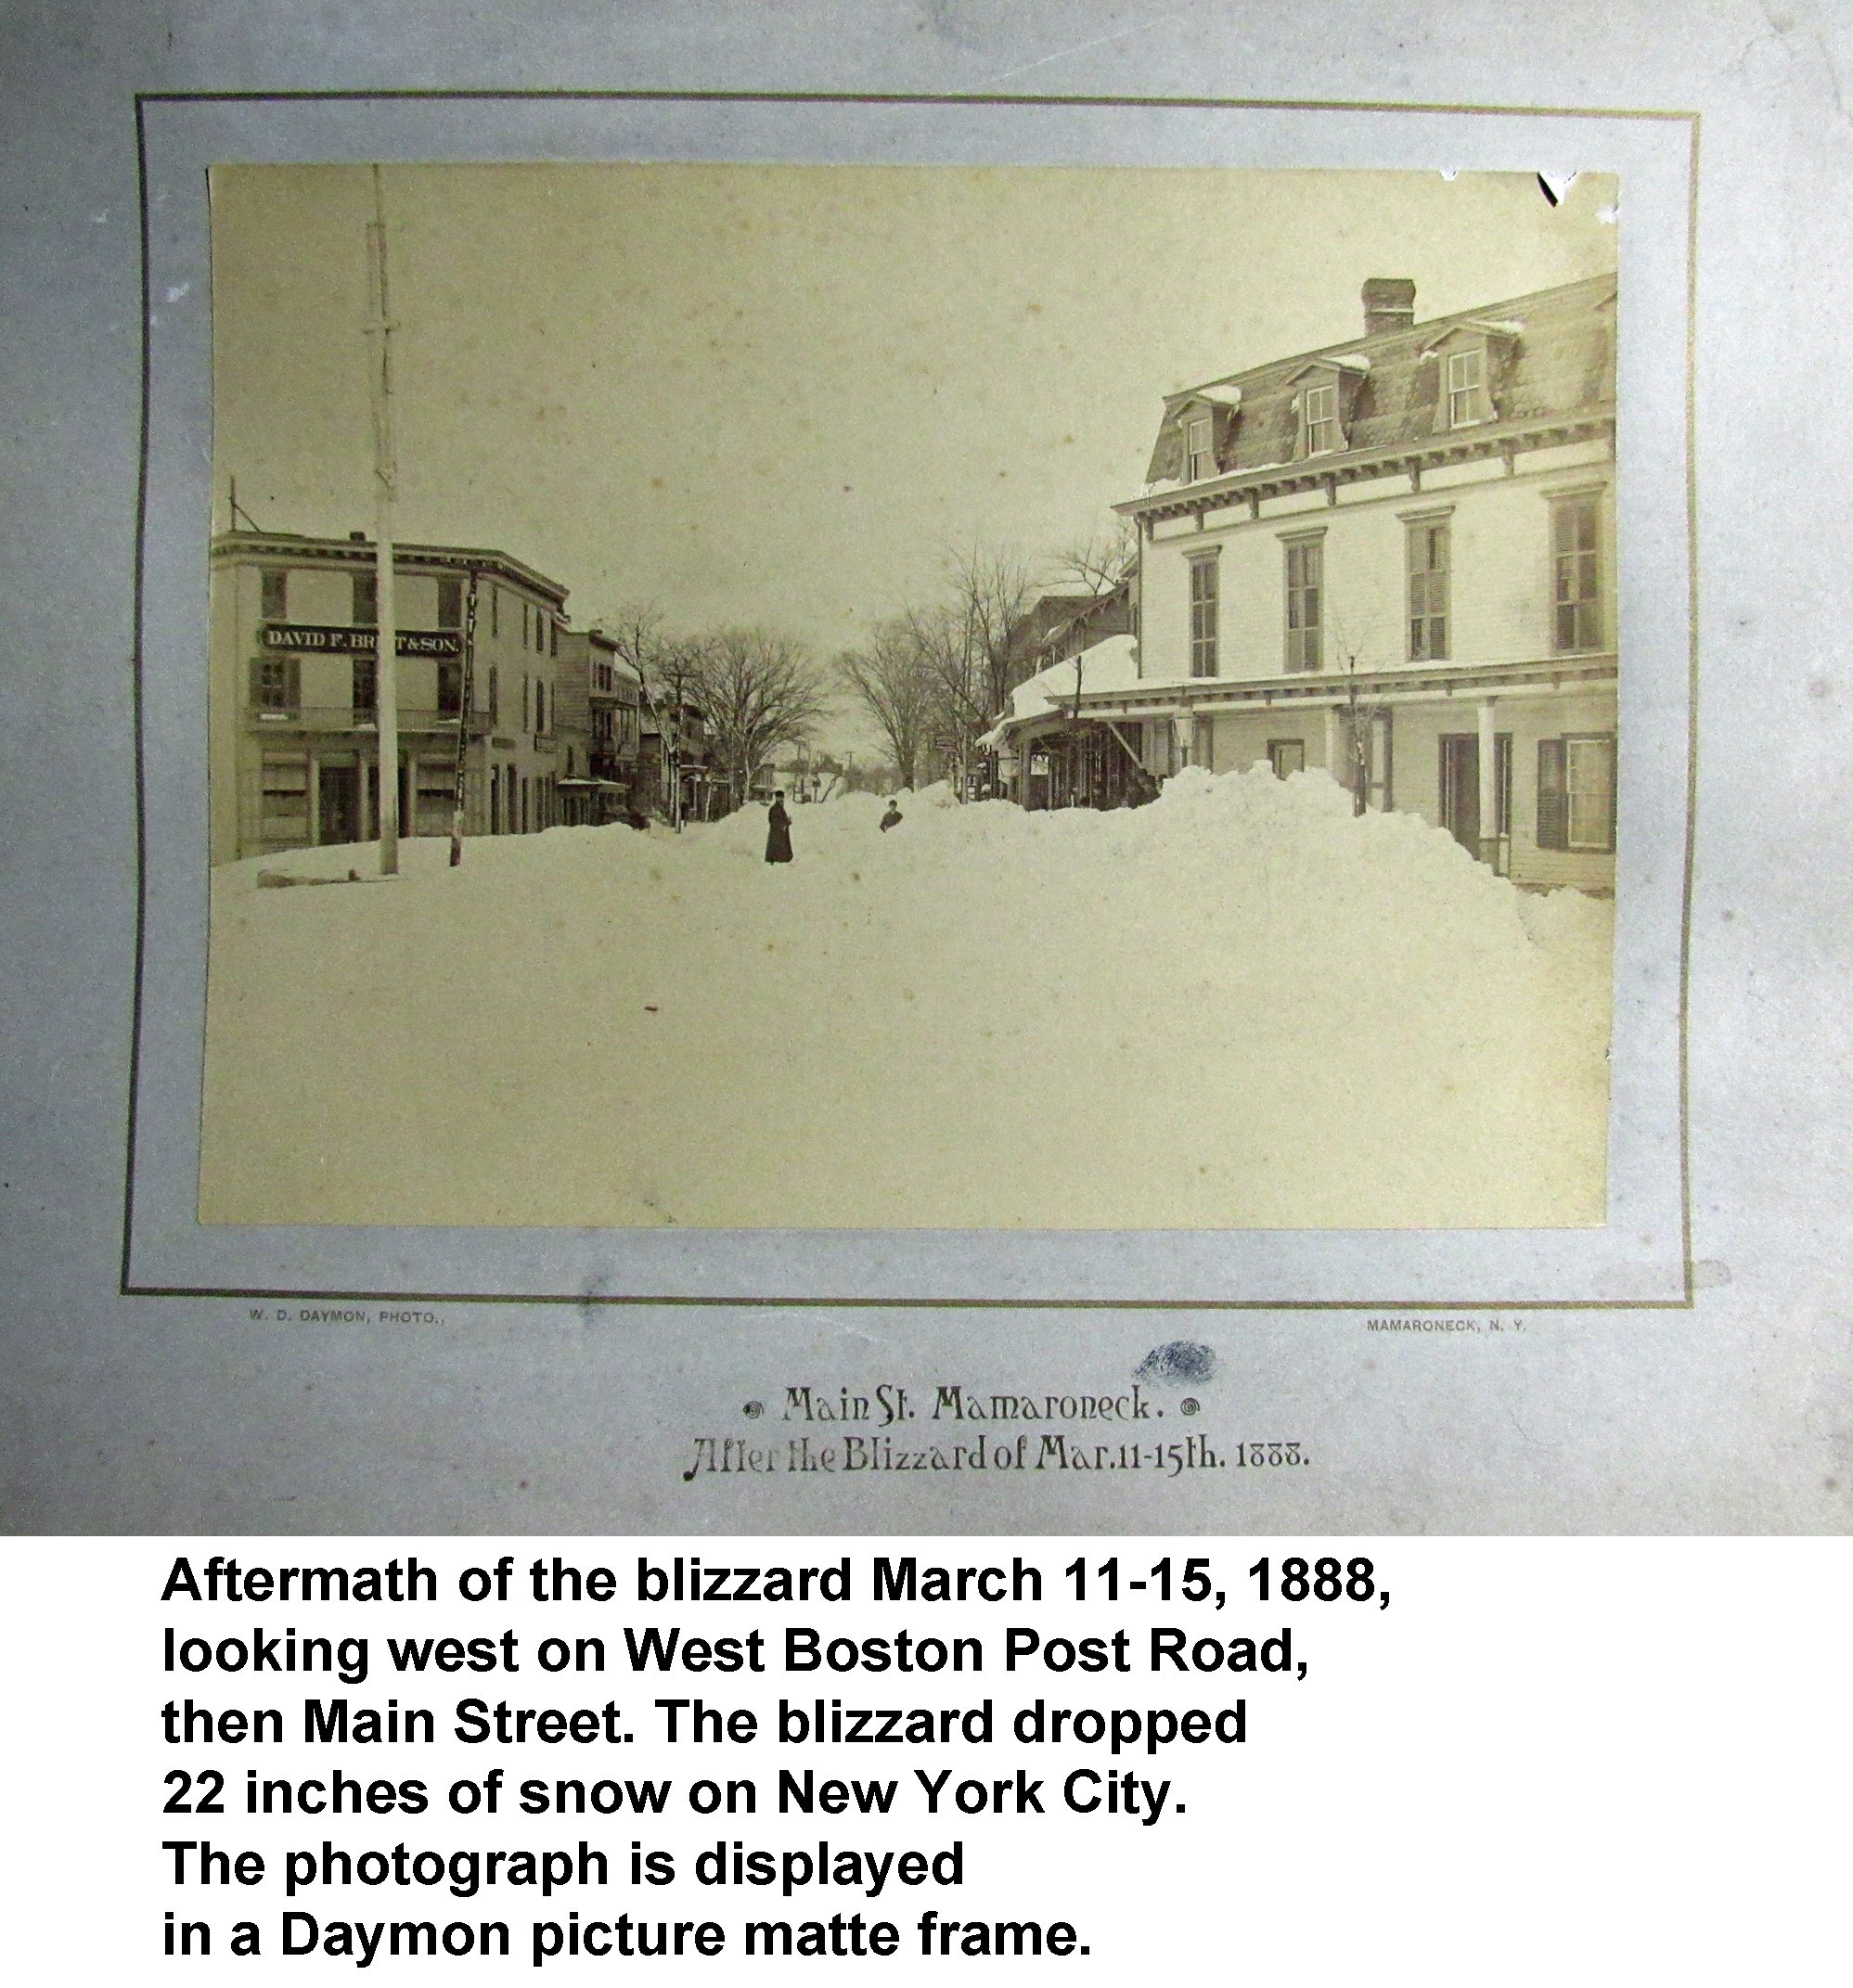 WD-16-A  The blizzard of 1888 looking west Main Street Mamaroneck After the Blizzard of March 11-15th 1888 captioned.jpg